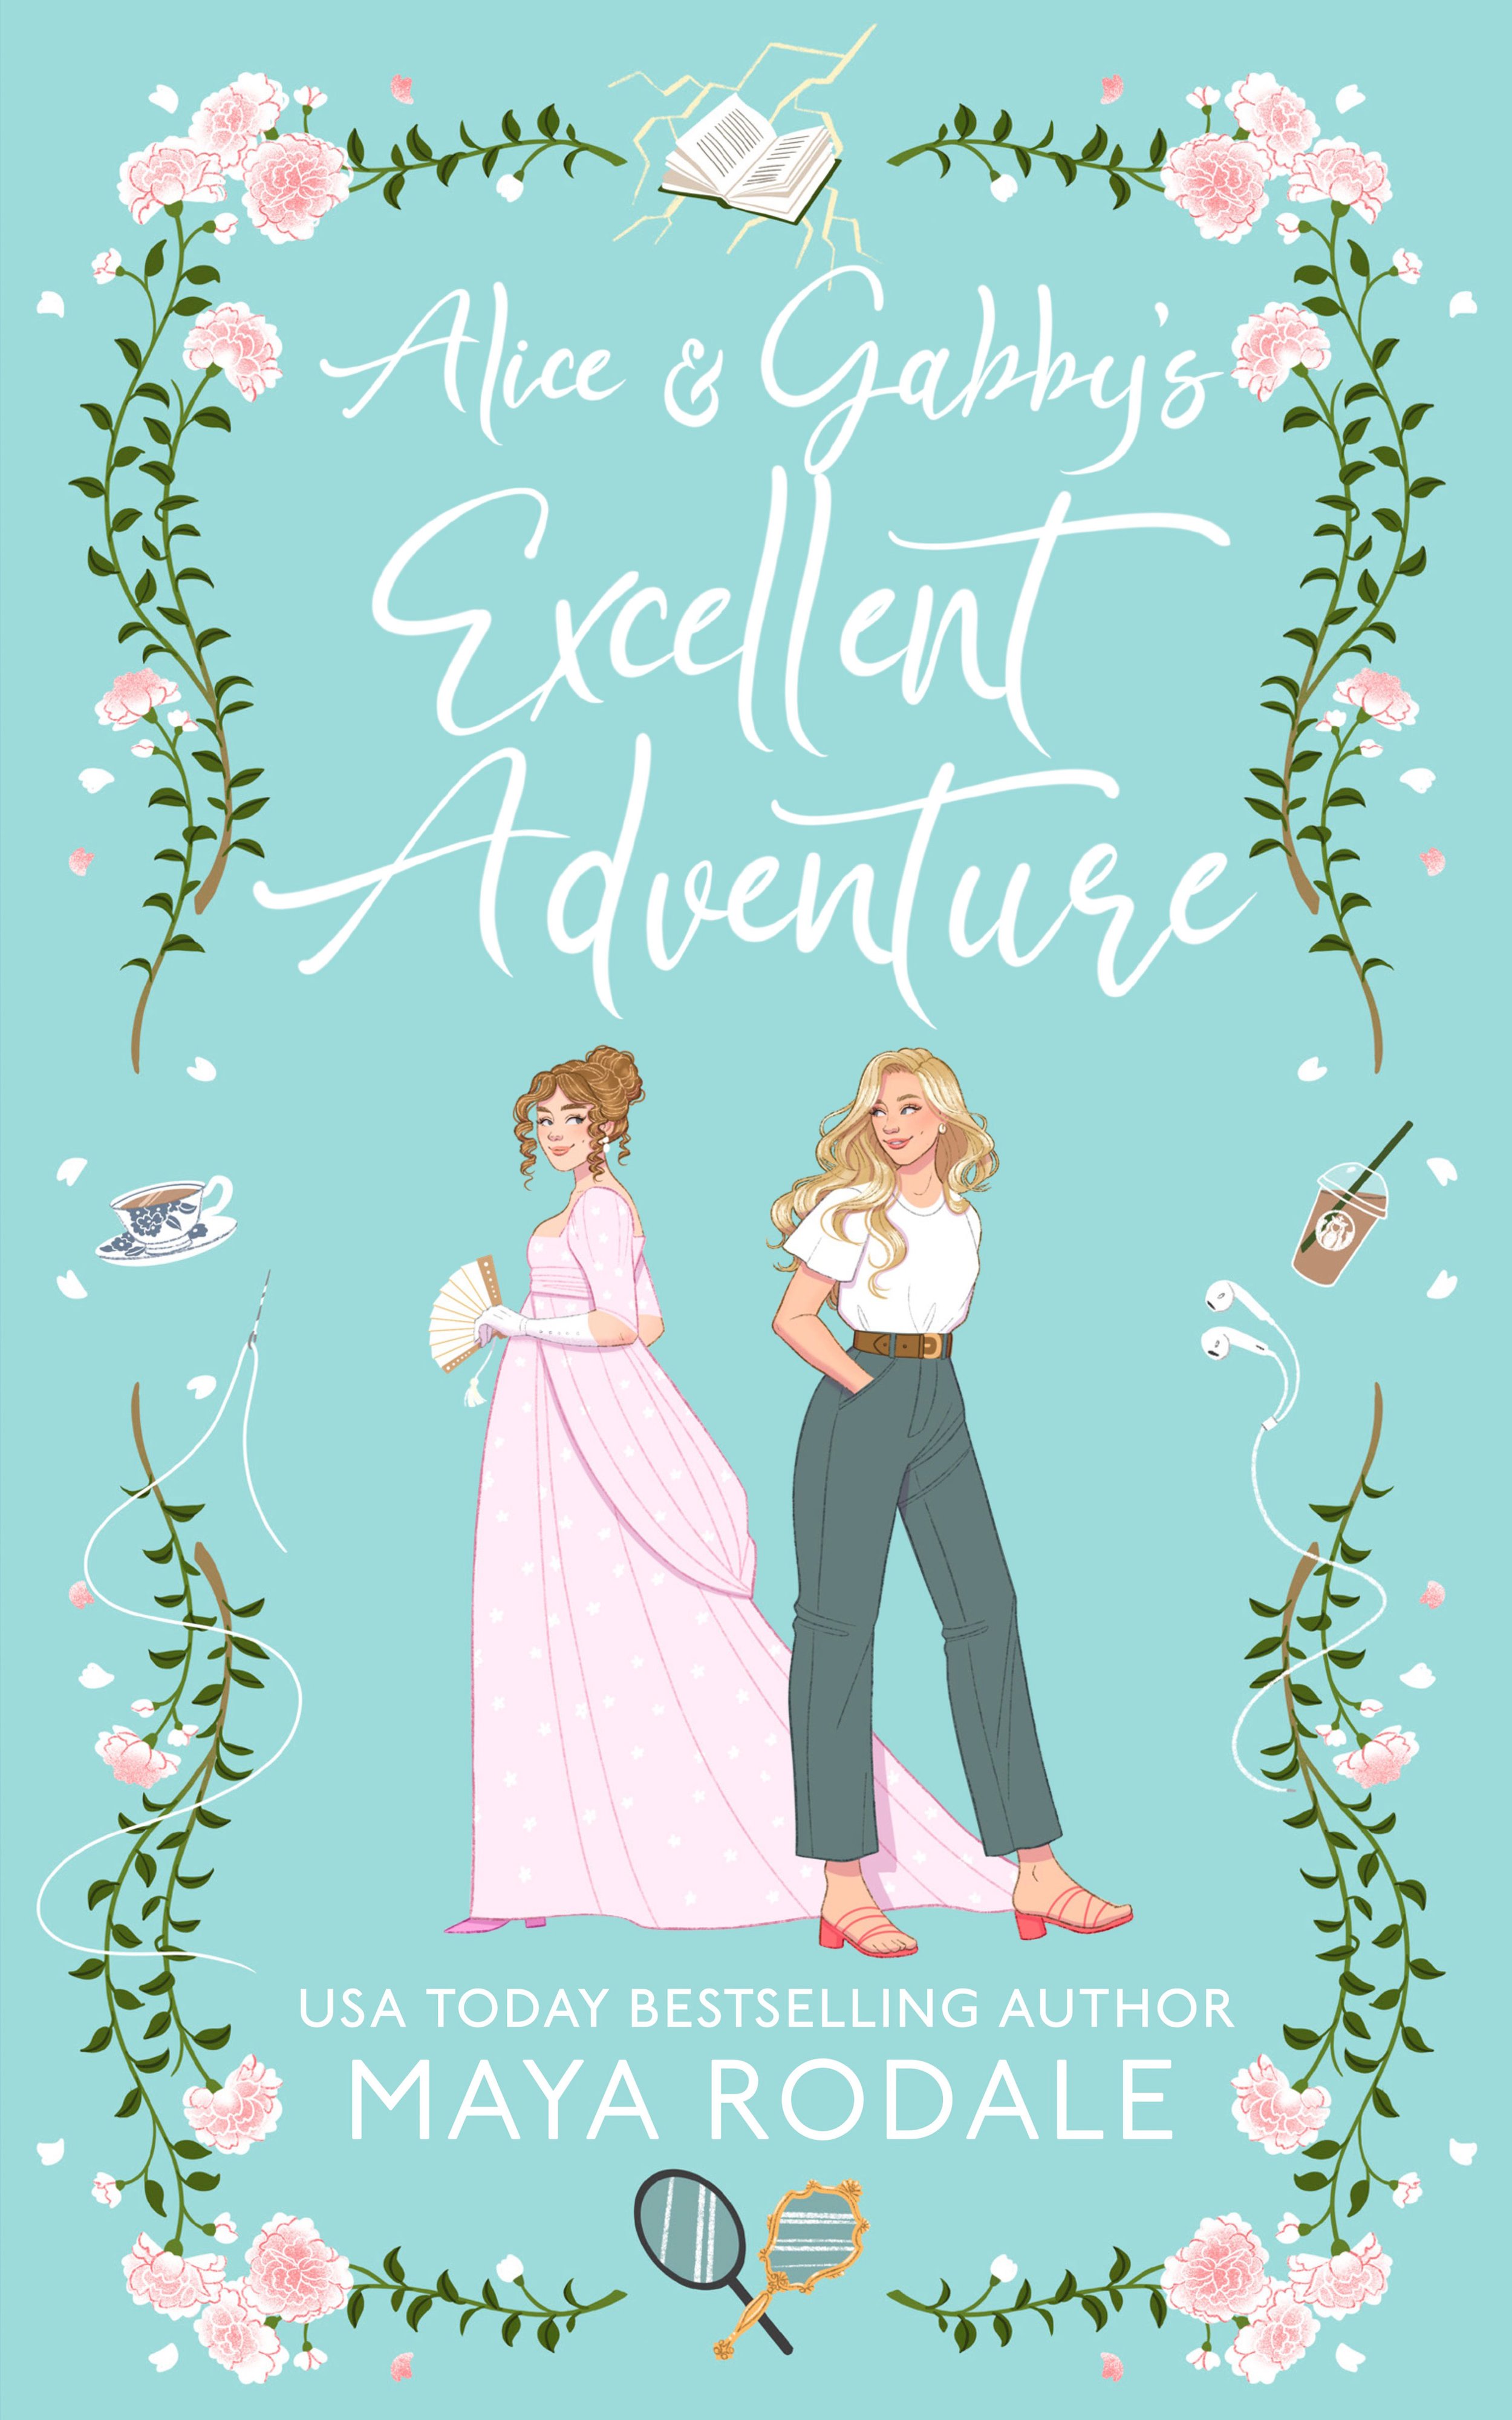 Alice-and-Gabby-front-Cover.jpg